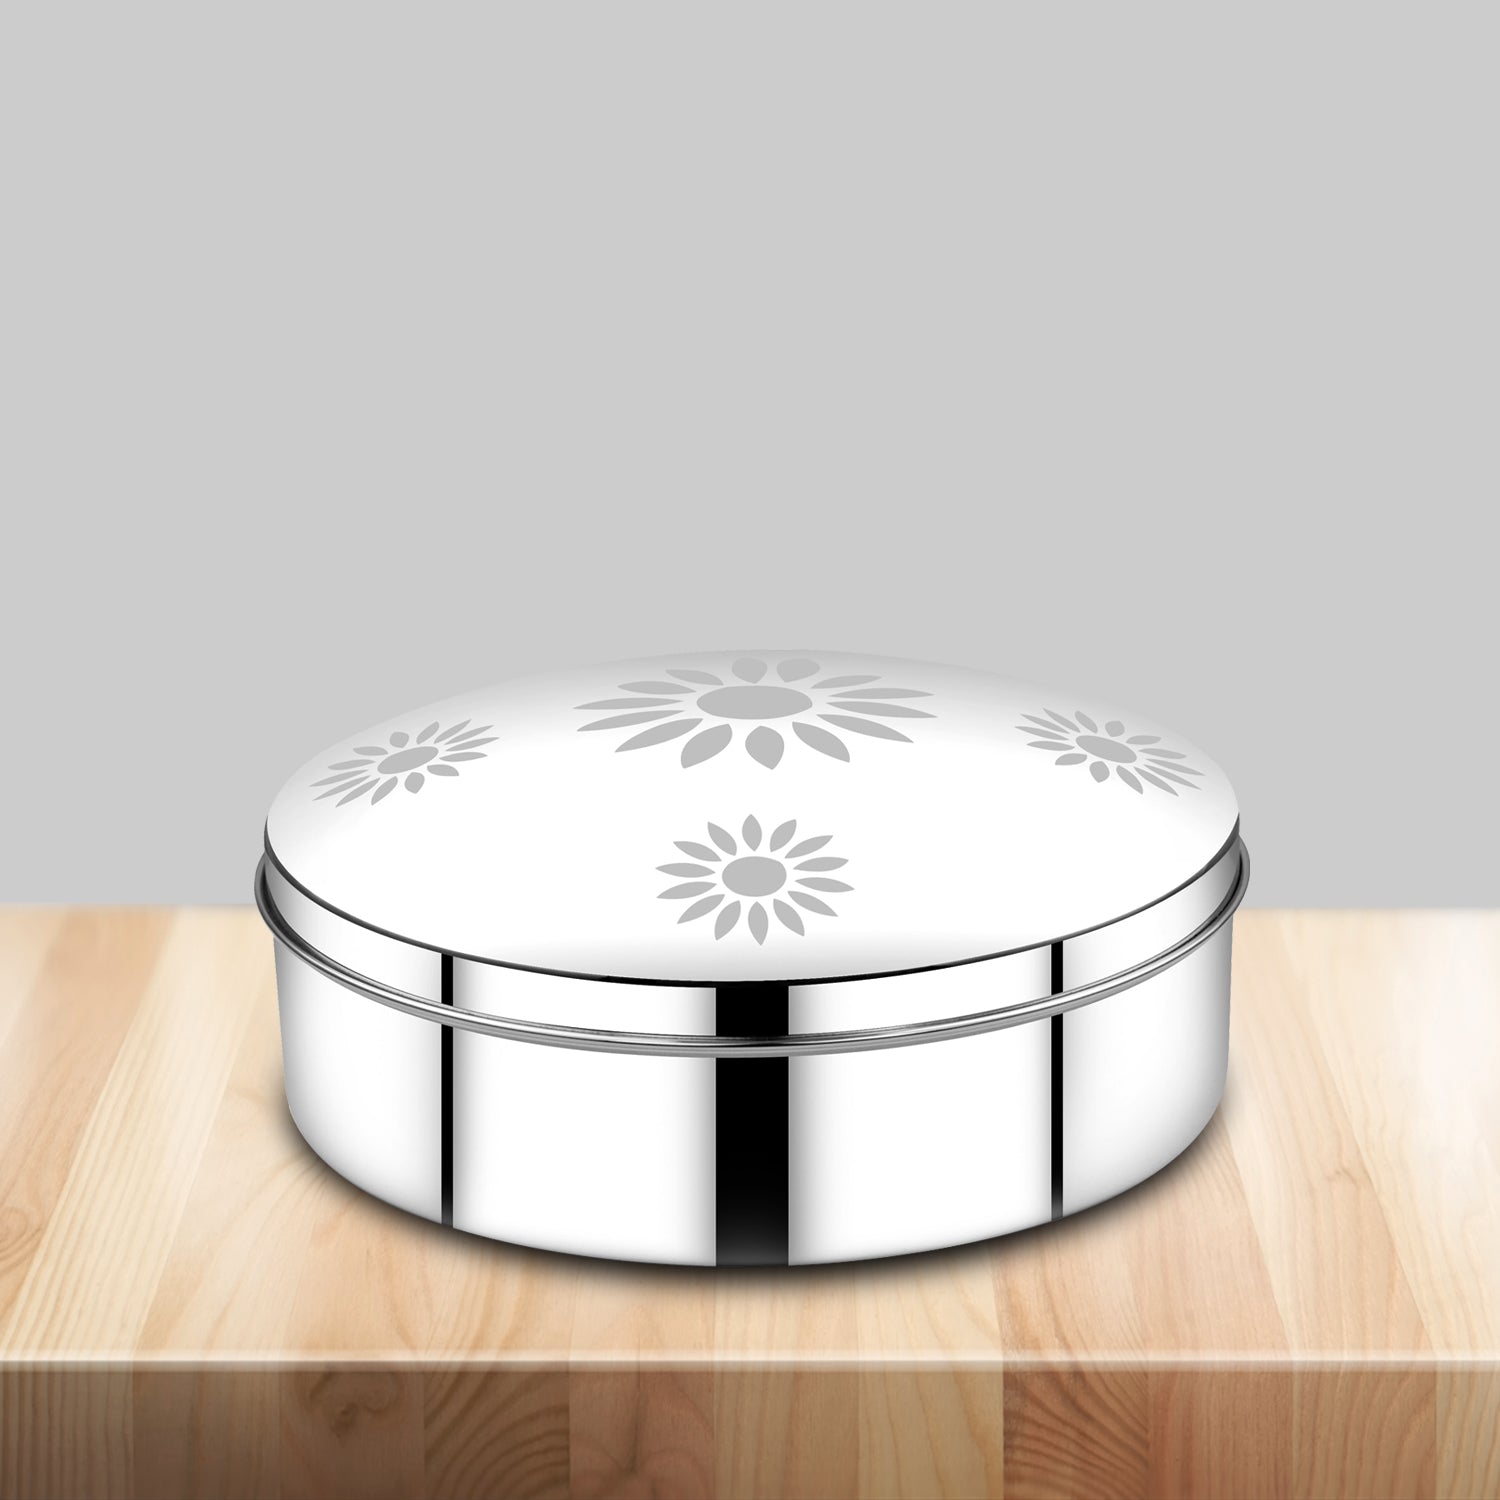 Dome stainless steel spice box